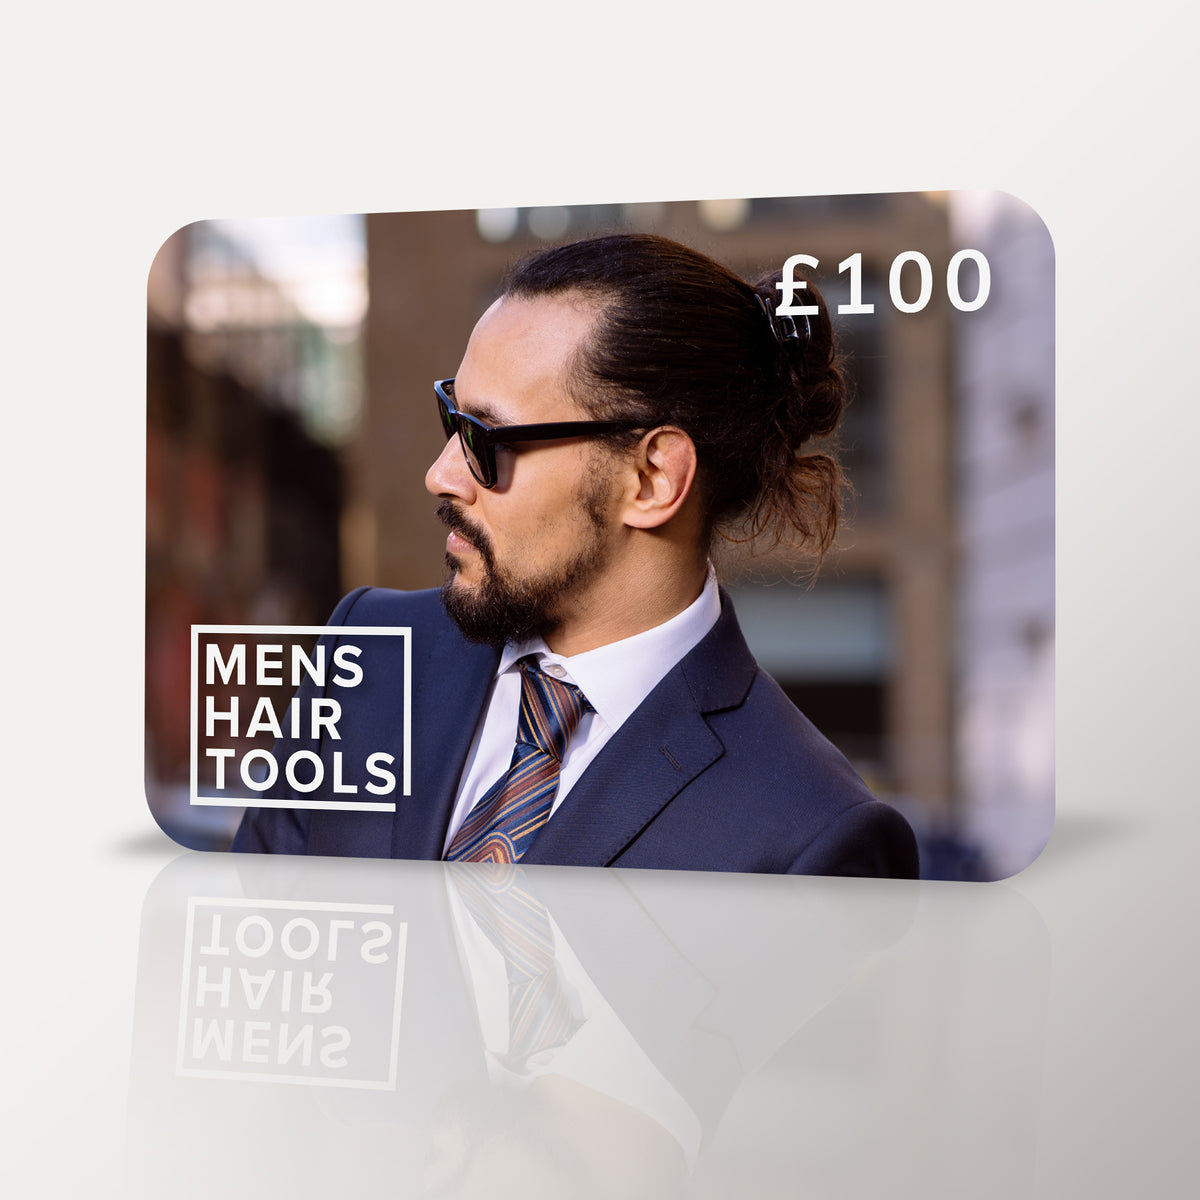 One-Hundred-Pounds-Gift-Voucher-Mens-Hair-Tools